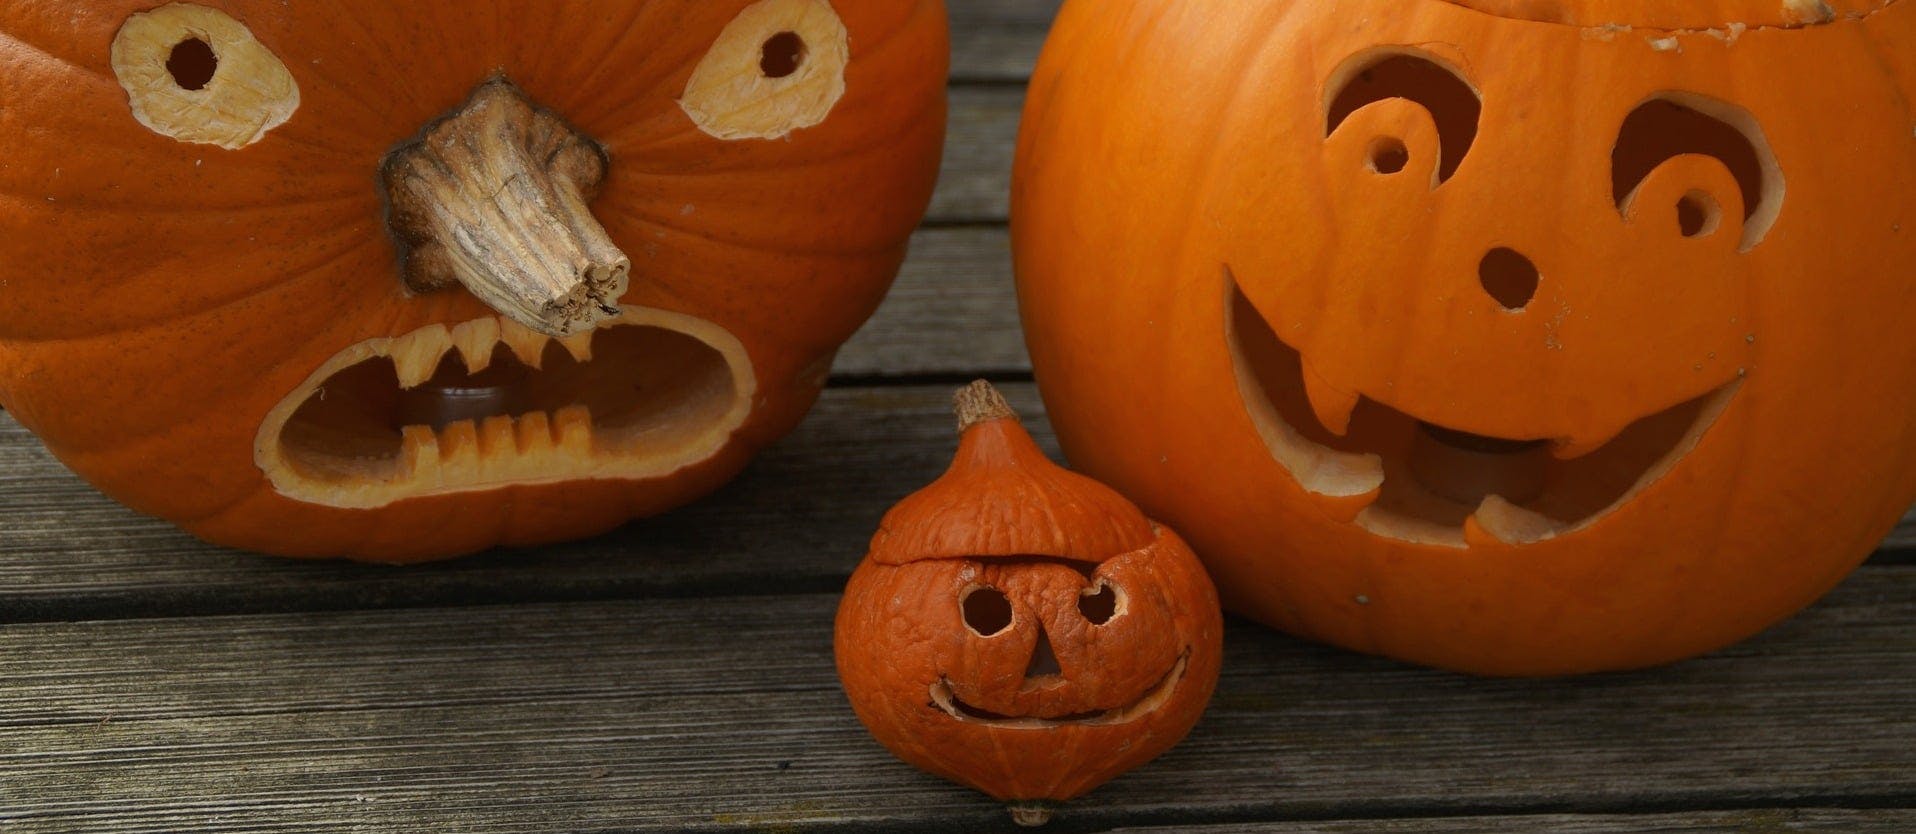 5 Tips for Halloween Safety